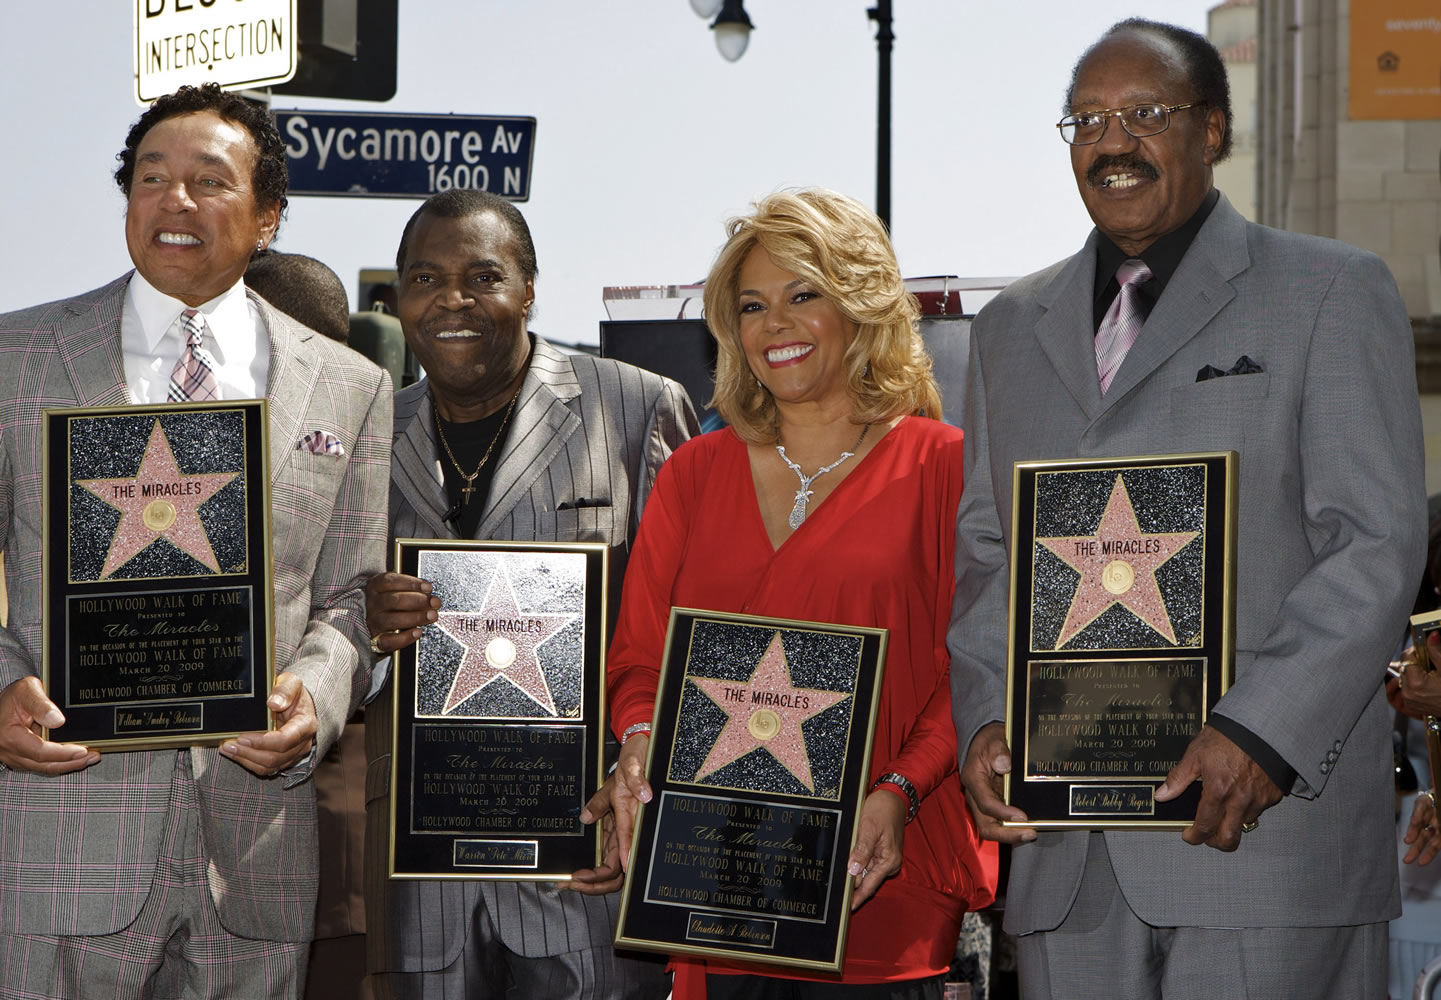 Members of the Motown group The Miracles, from left, William &quot;Smokey&quot; Robinson, Warren &quot;Pete&quot; Moore, Claudette Robinson, and Robert &quot;Bobby&quot; Rogers, are honored with a star on the Hollywood Walk of Fame in Los Angeles in March 2009. Rogers, a founding member of the group and a collaborator with Smokey, has died. Motown Museum board member Allen Rawls said Rogers died Sunday.